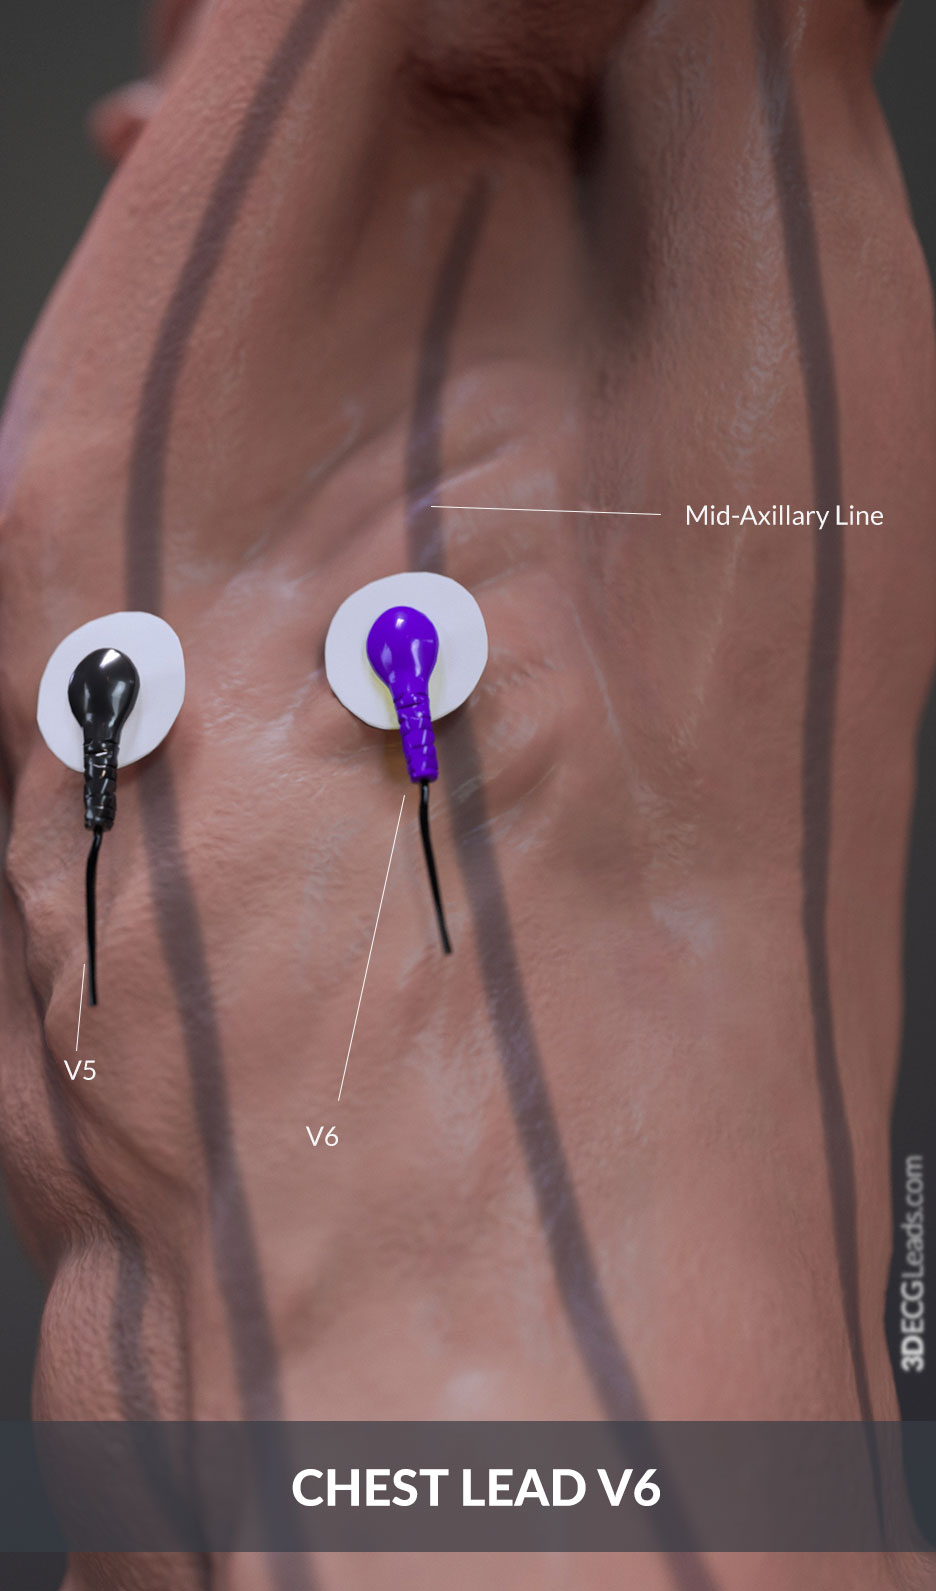 where to place ecg leads on chest